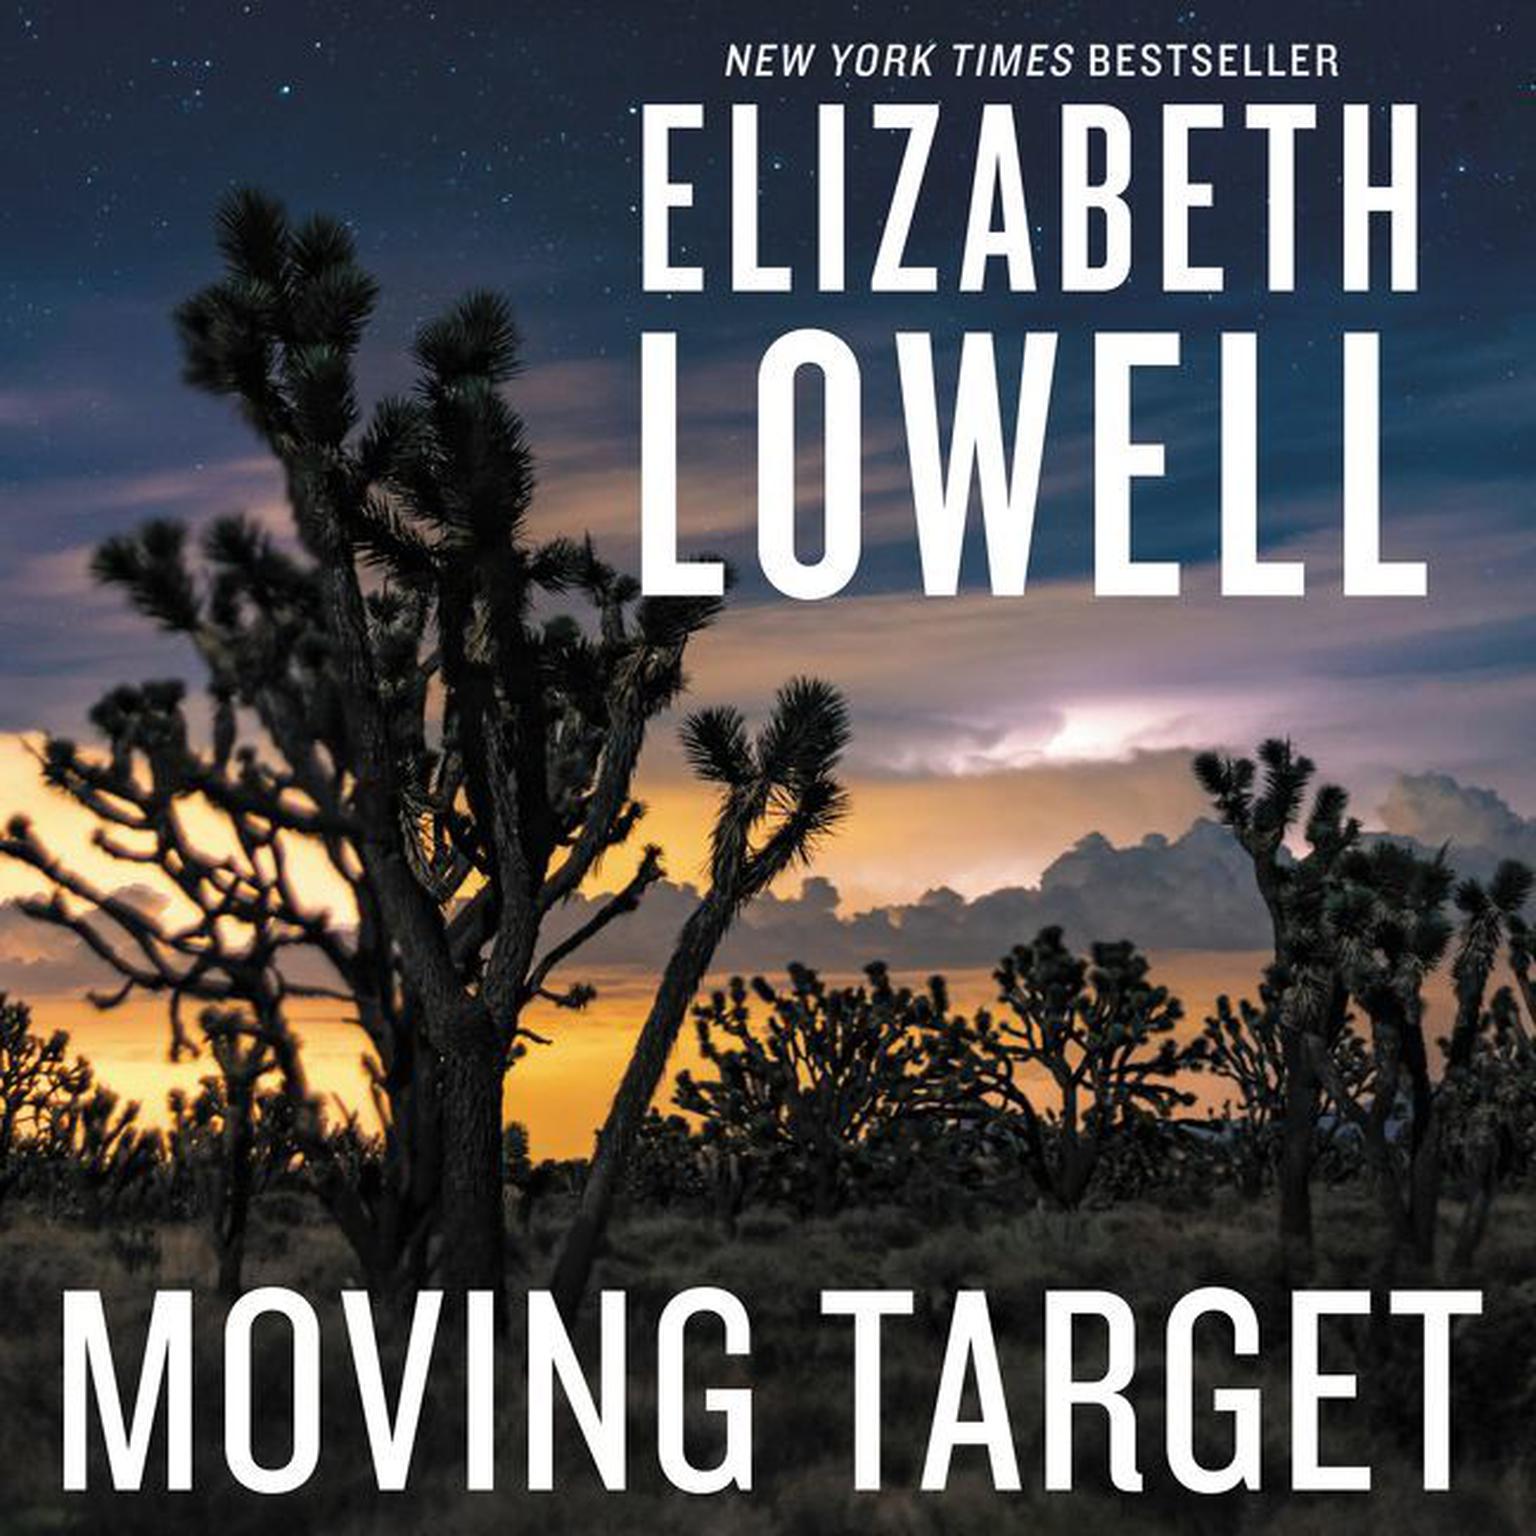 Moving Target (Abridged) Audiobook, by Elizabeth Lowell